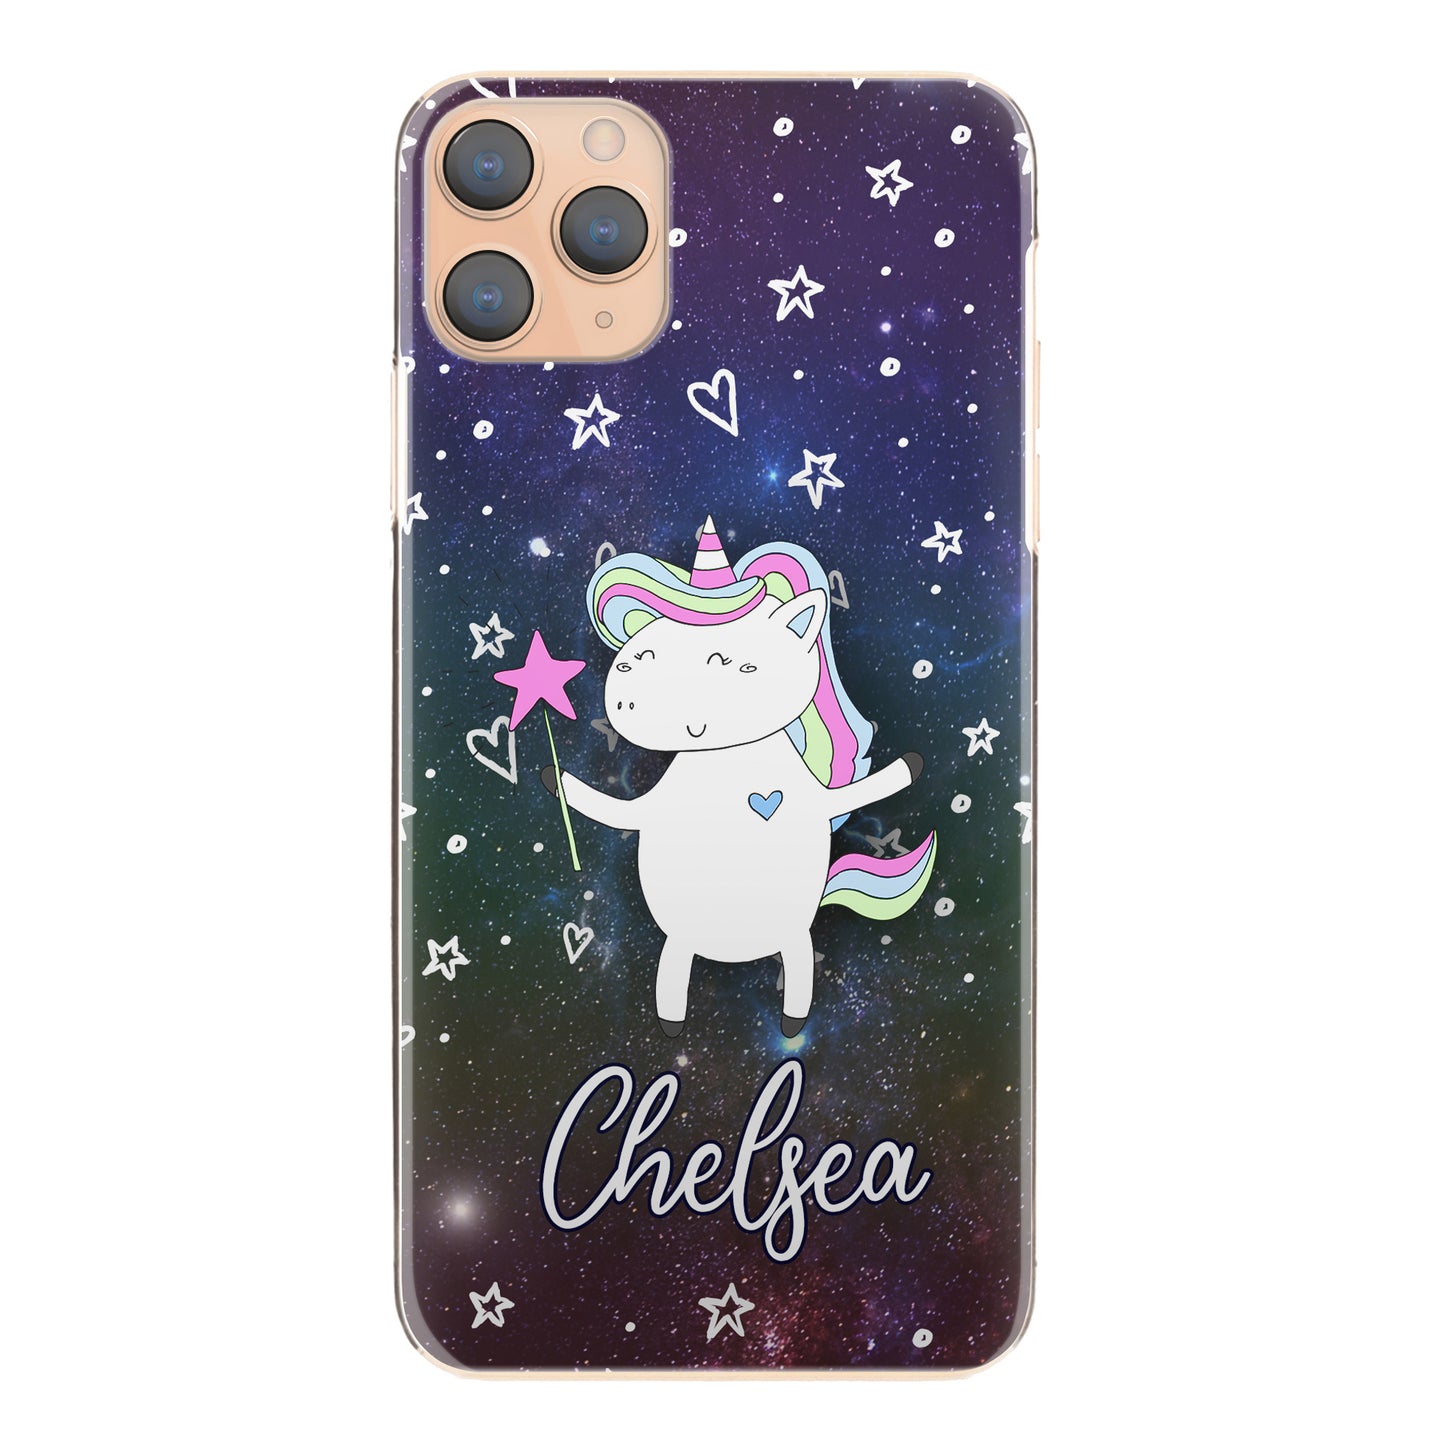 Personalised Honor Phone Hard Case with Magic Unicorn and Name on Stars and Hearts Galaxy